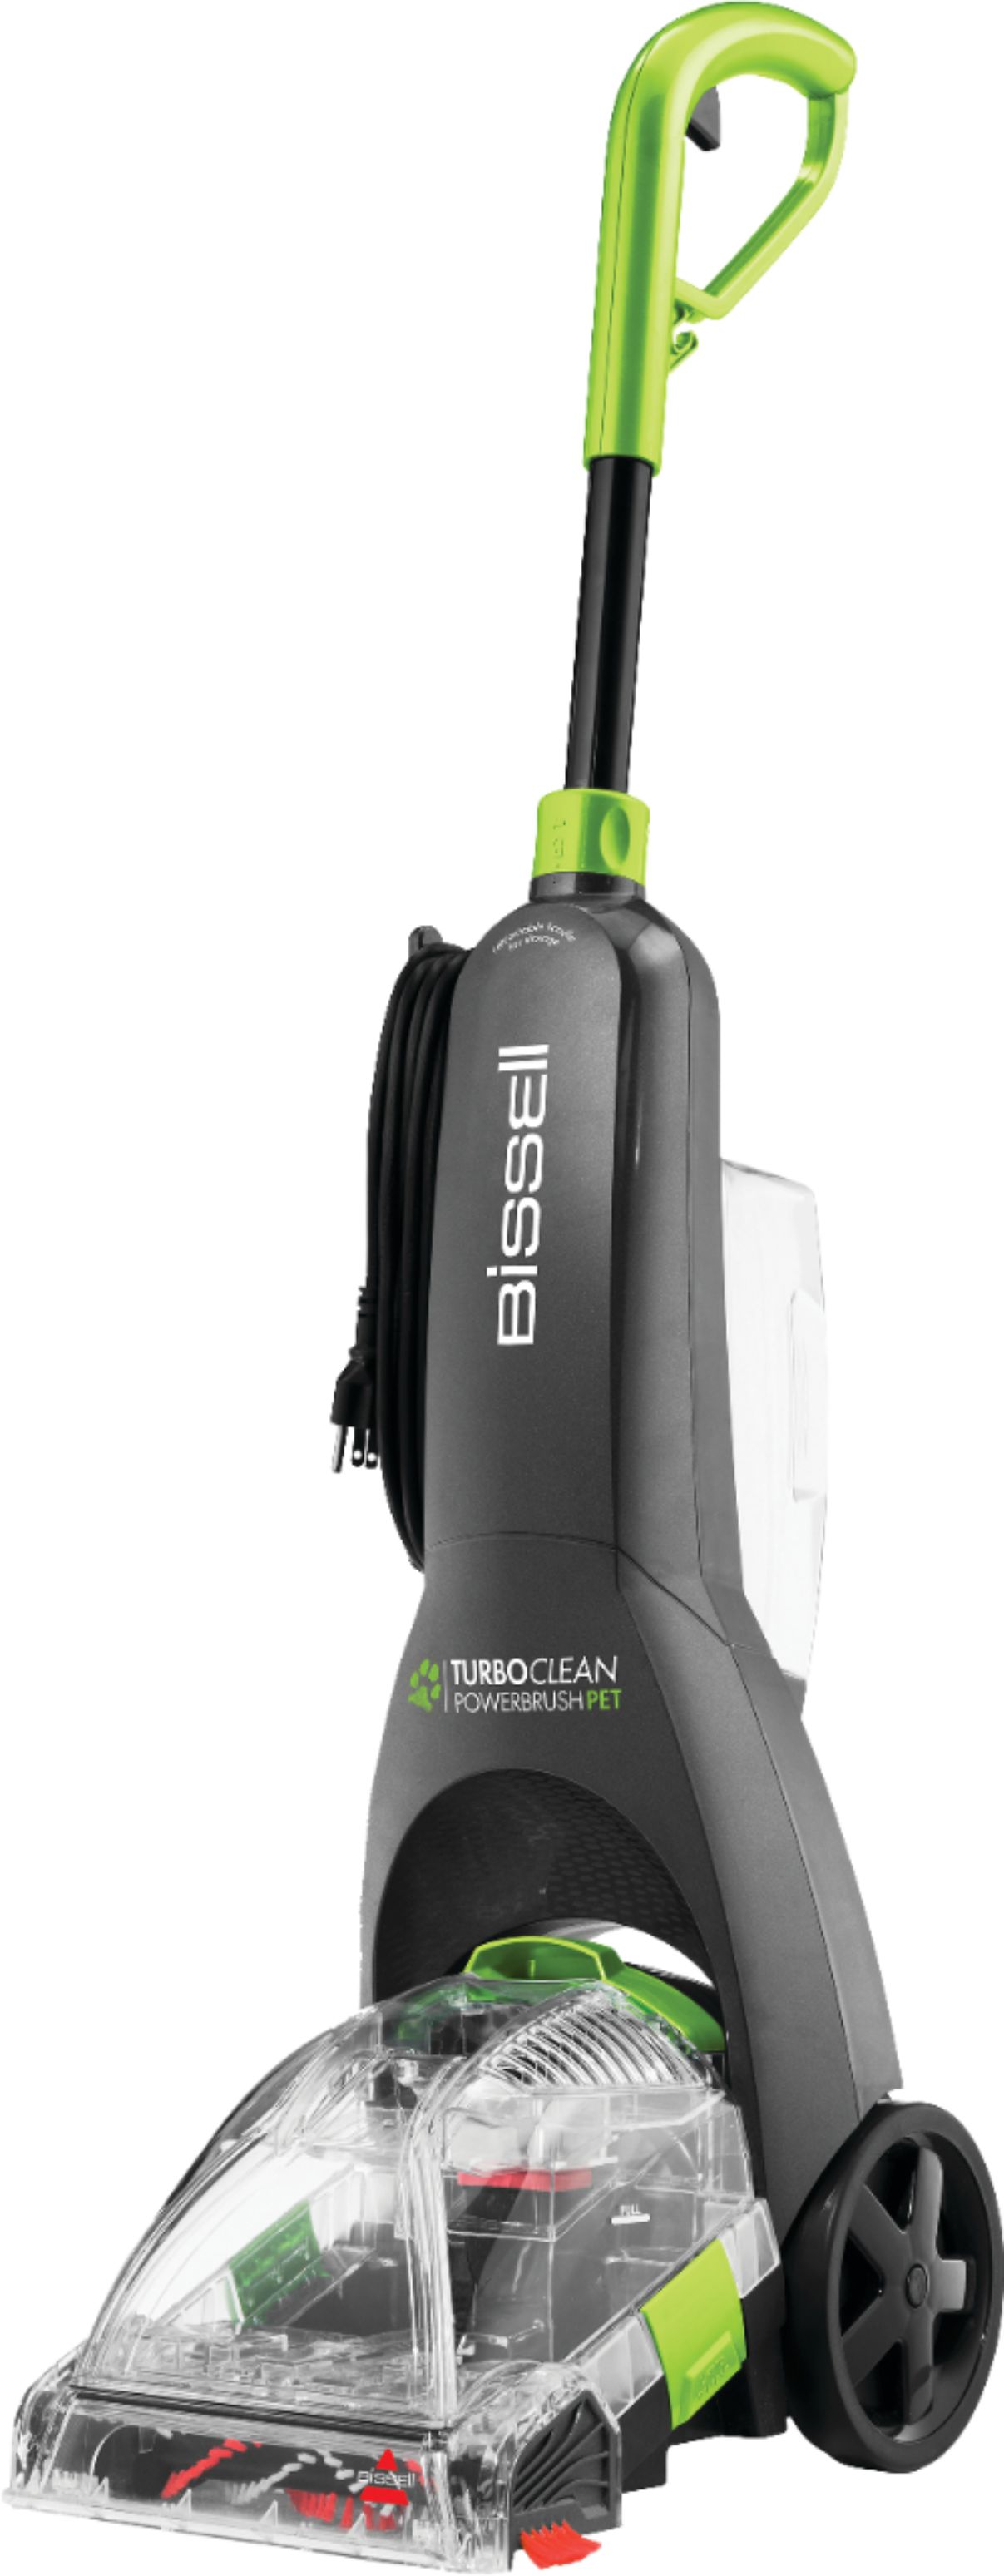 Left View: BISSELL - TurboClean™ PowerBrush Pet Carpet Cleaner - Titanium with ChaCha Lime Accents